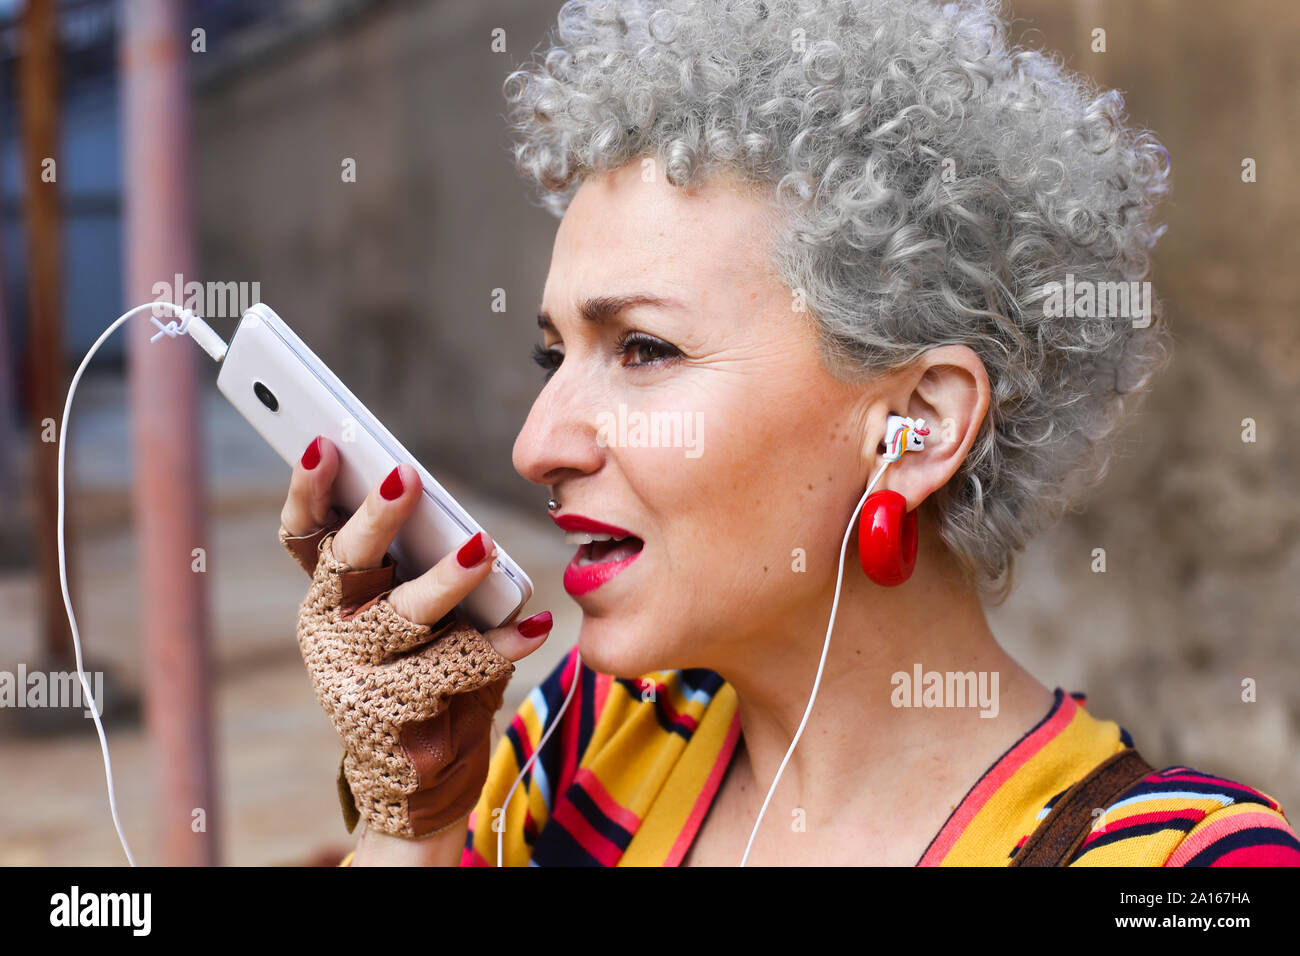 Portrait of pierced mature woman with grey curly hair using earphones and cell phone Stock Photo